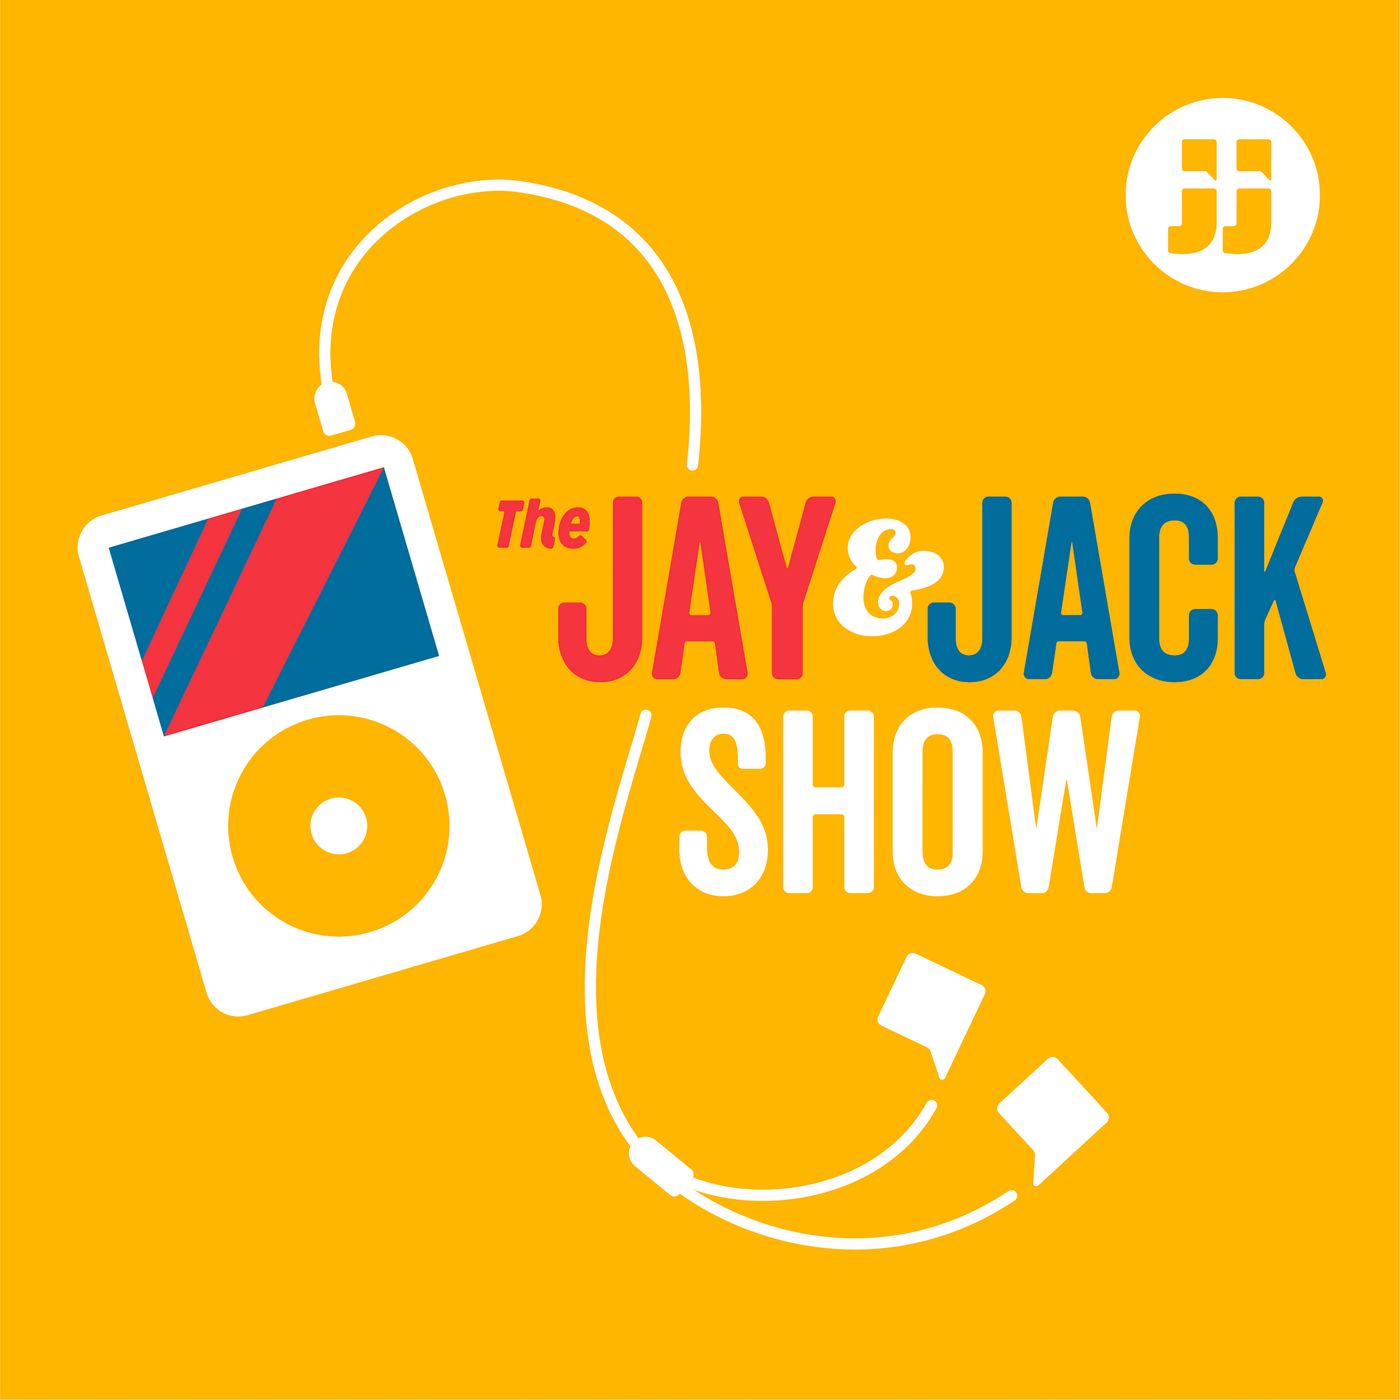 The Jay and Jack Show Ep. 007 "Opinionated, JOpinionated"